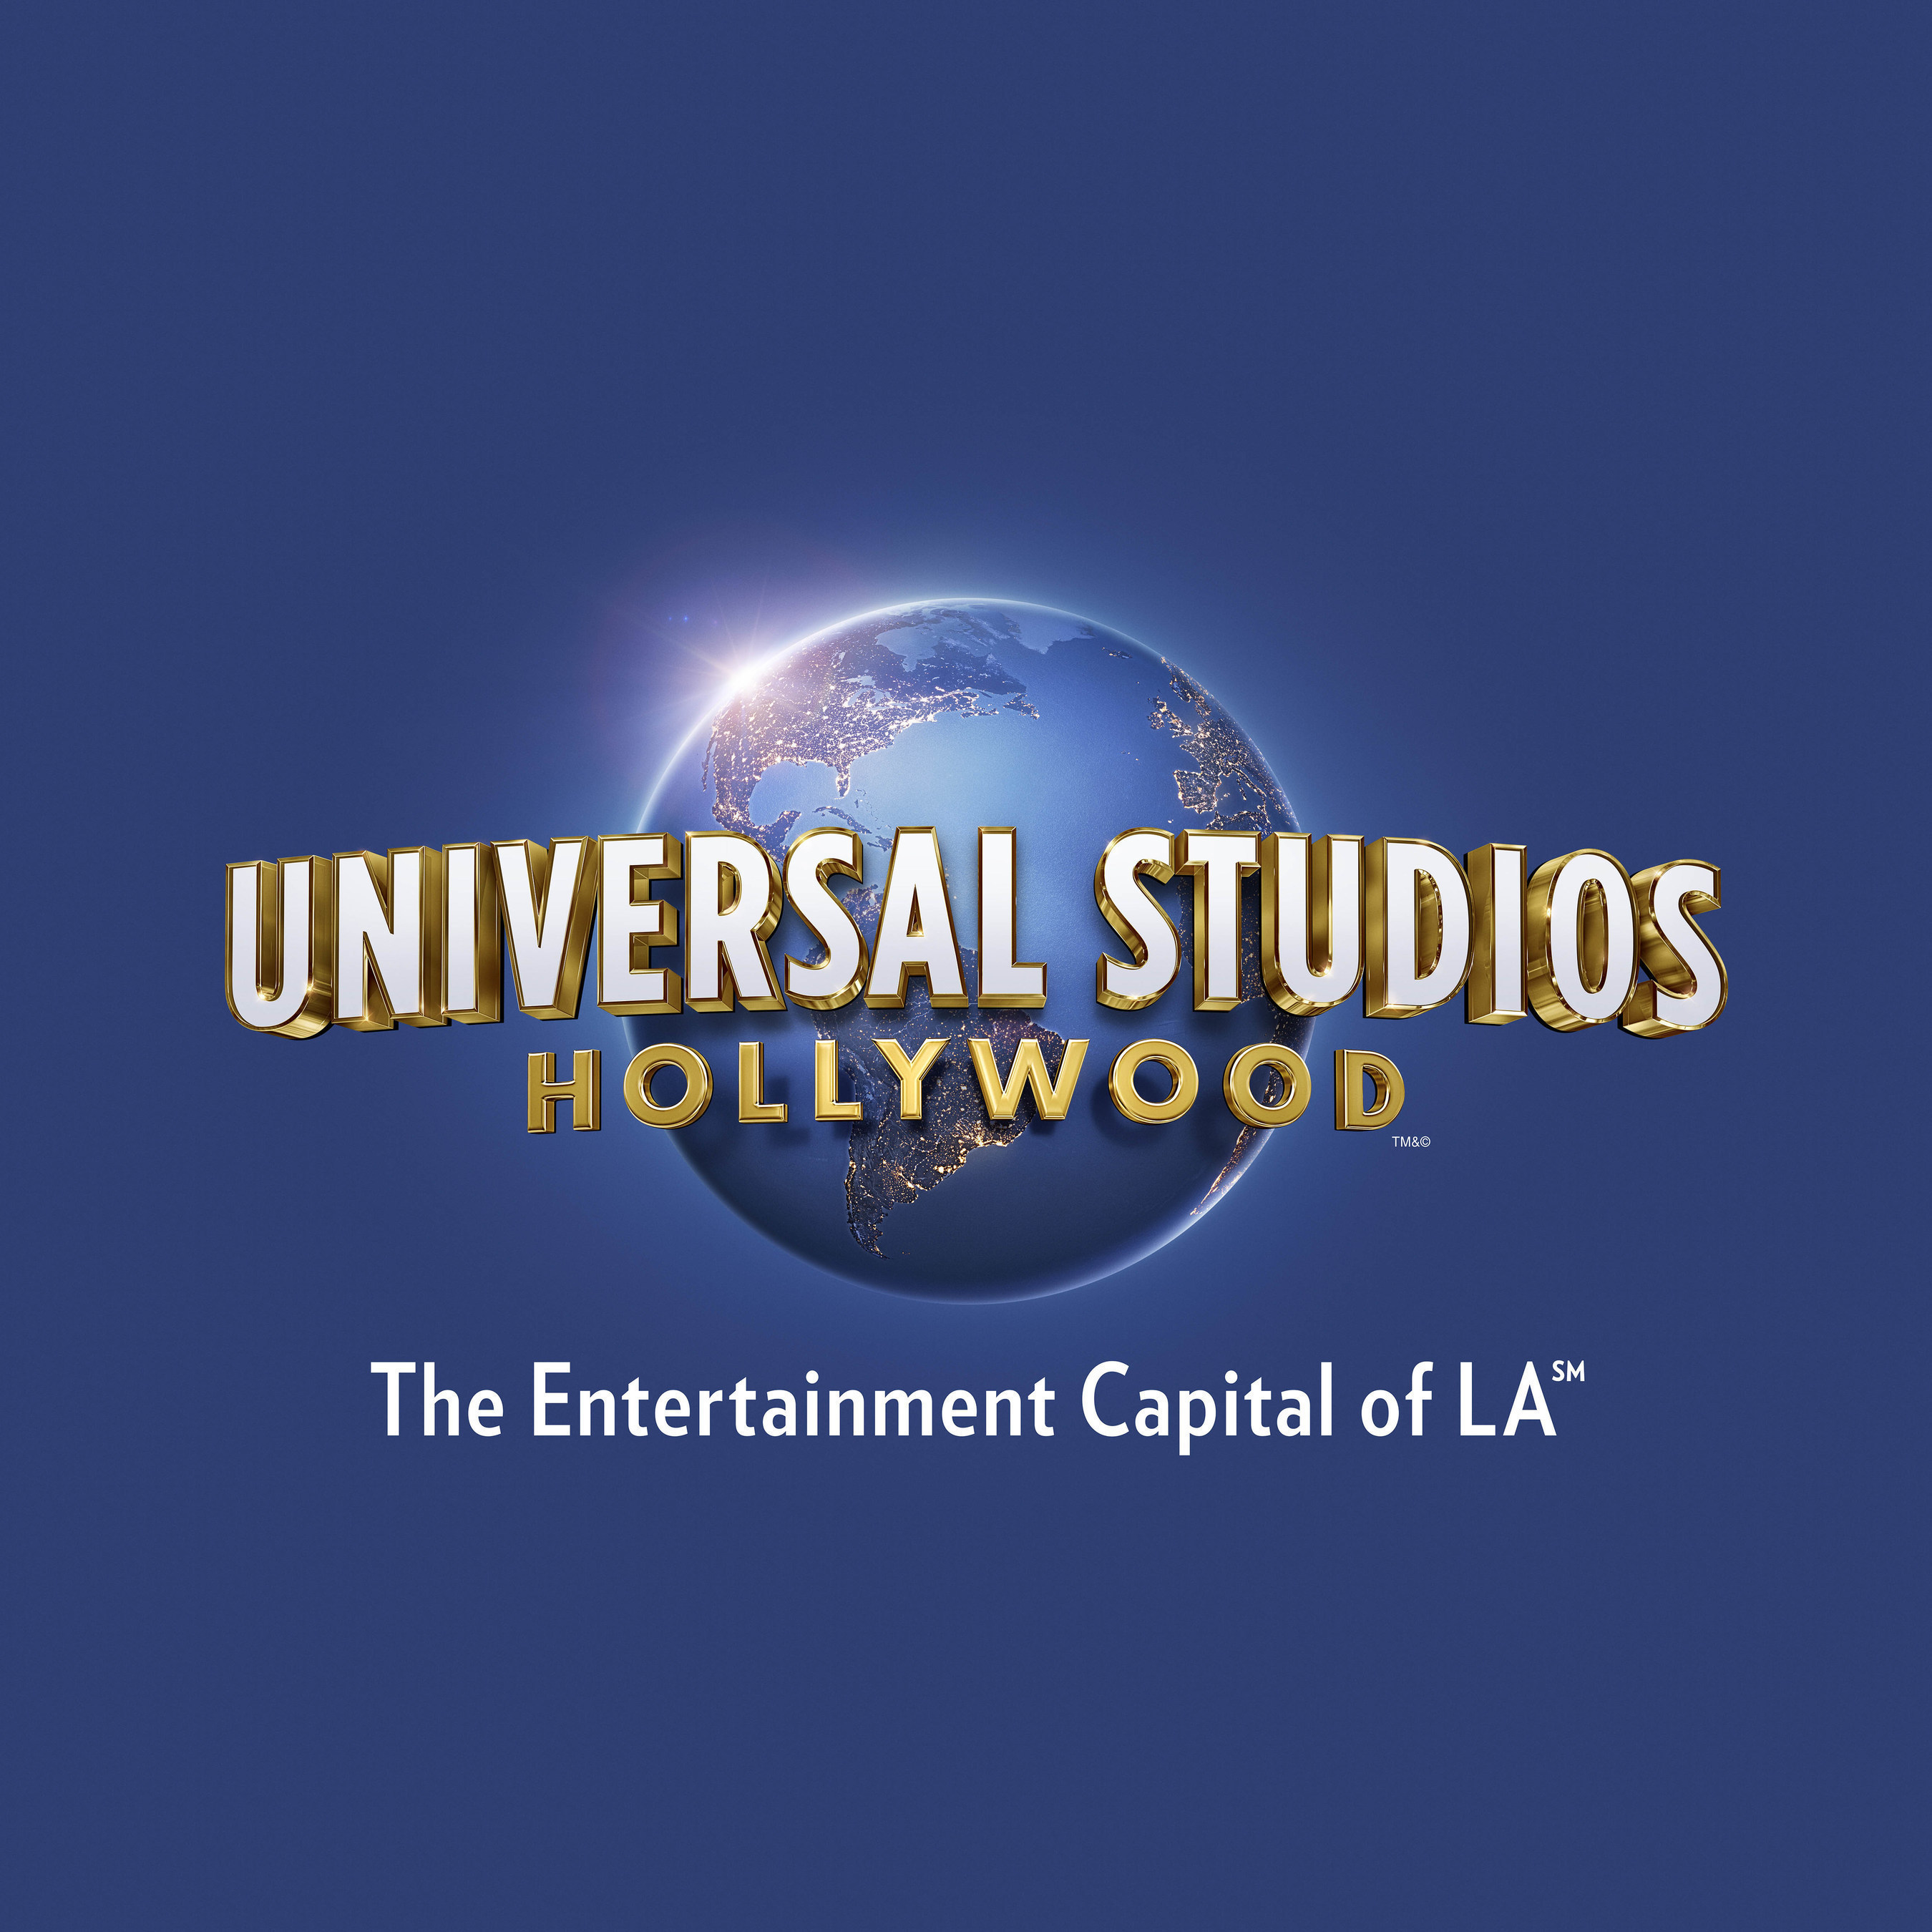 Universal Studios Hollywood Debuts Streamlined New Logo as The